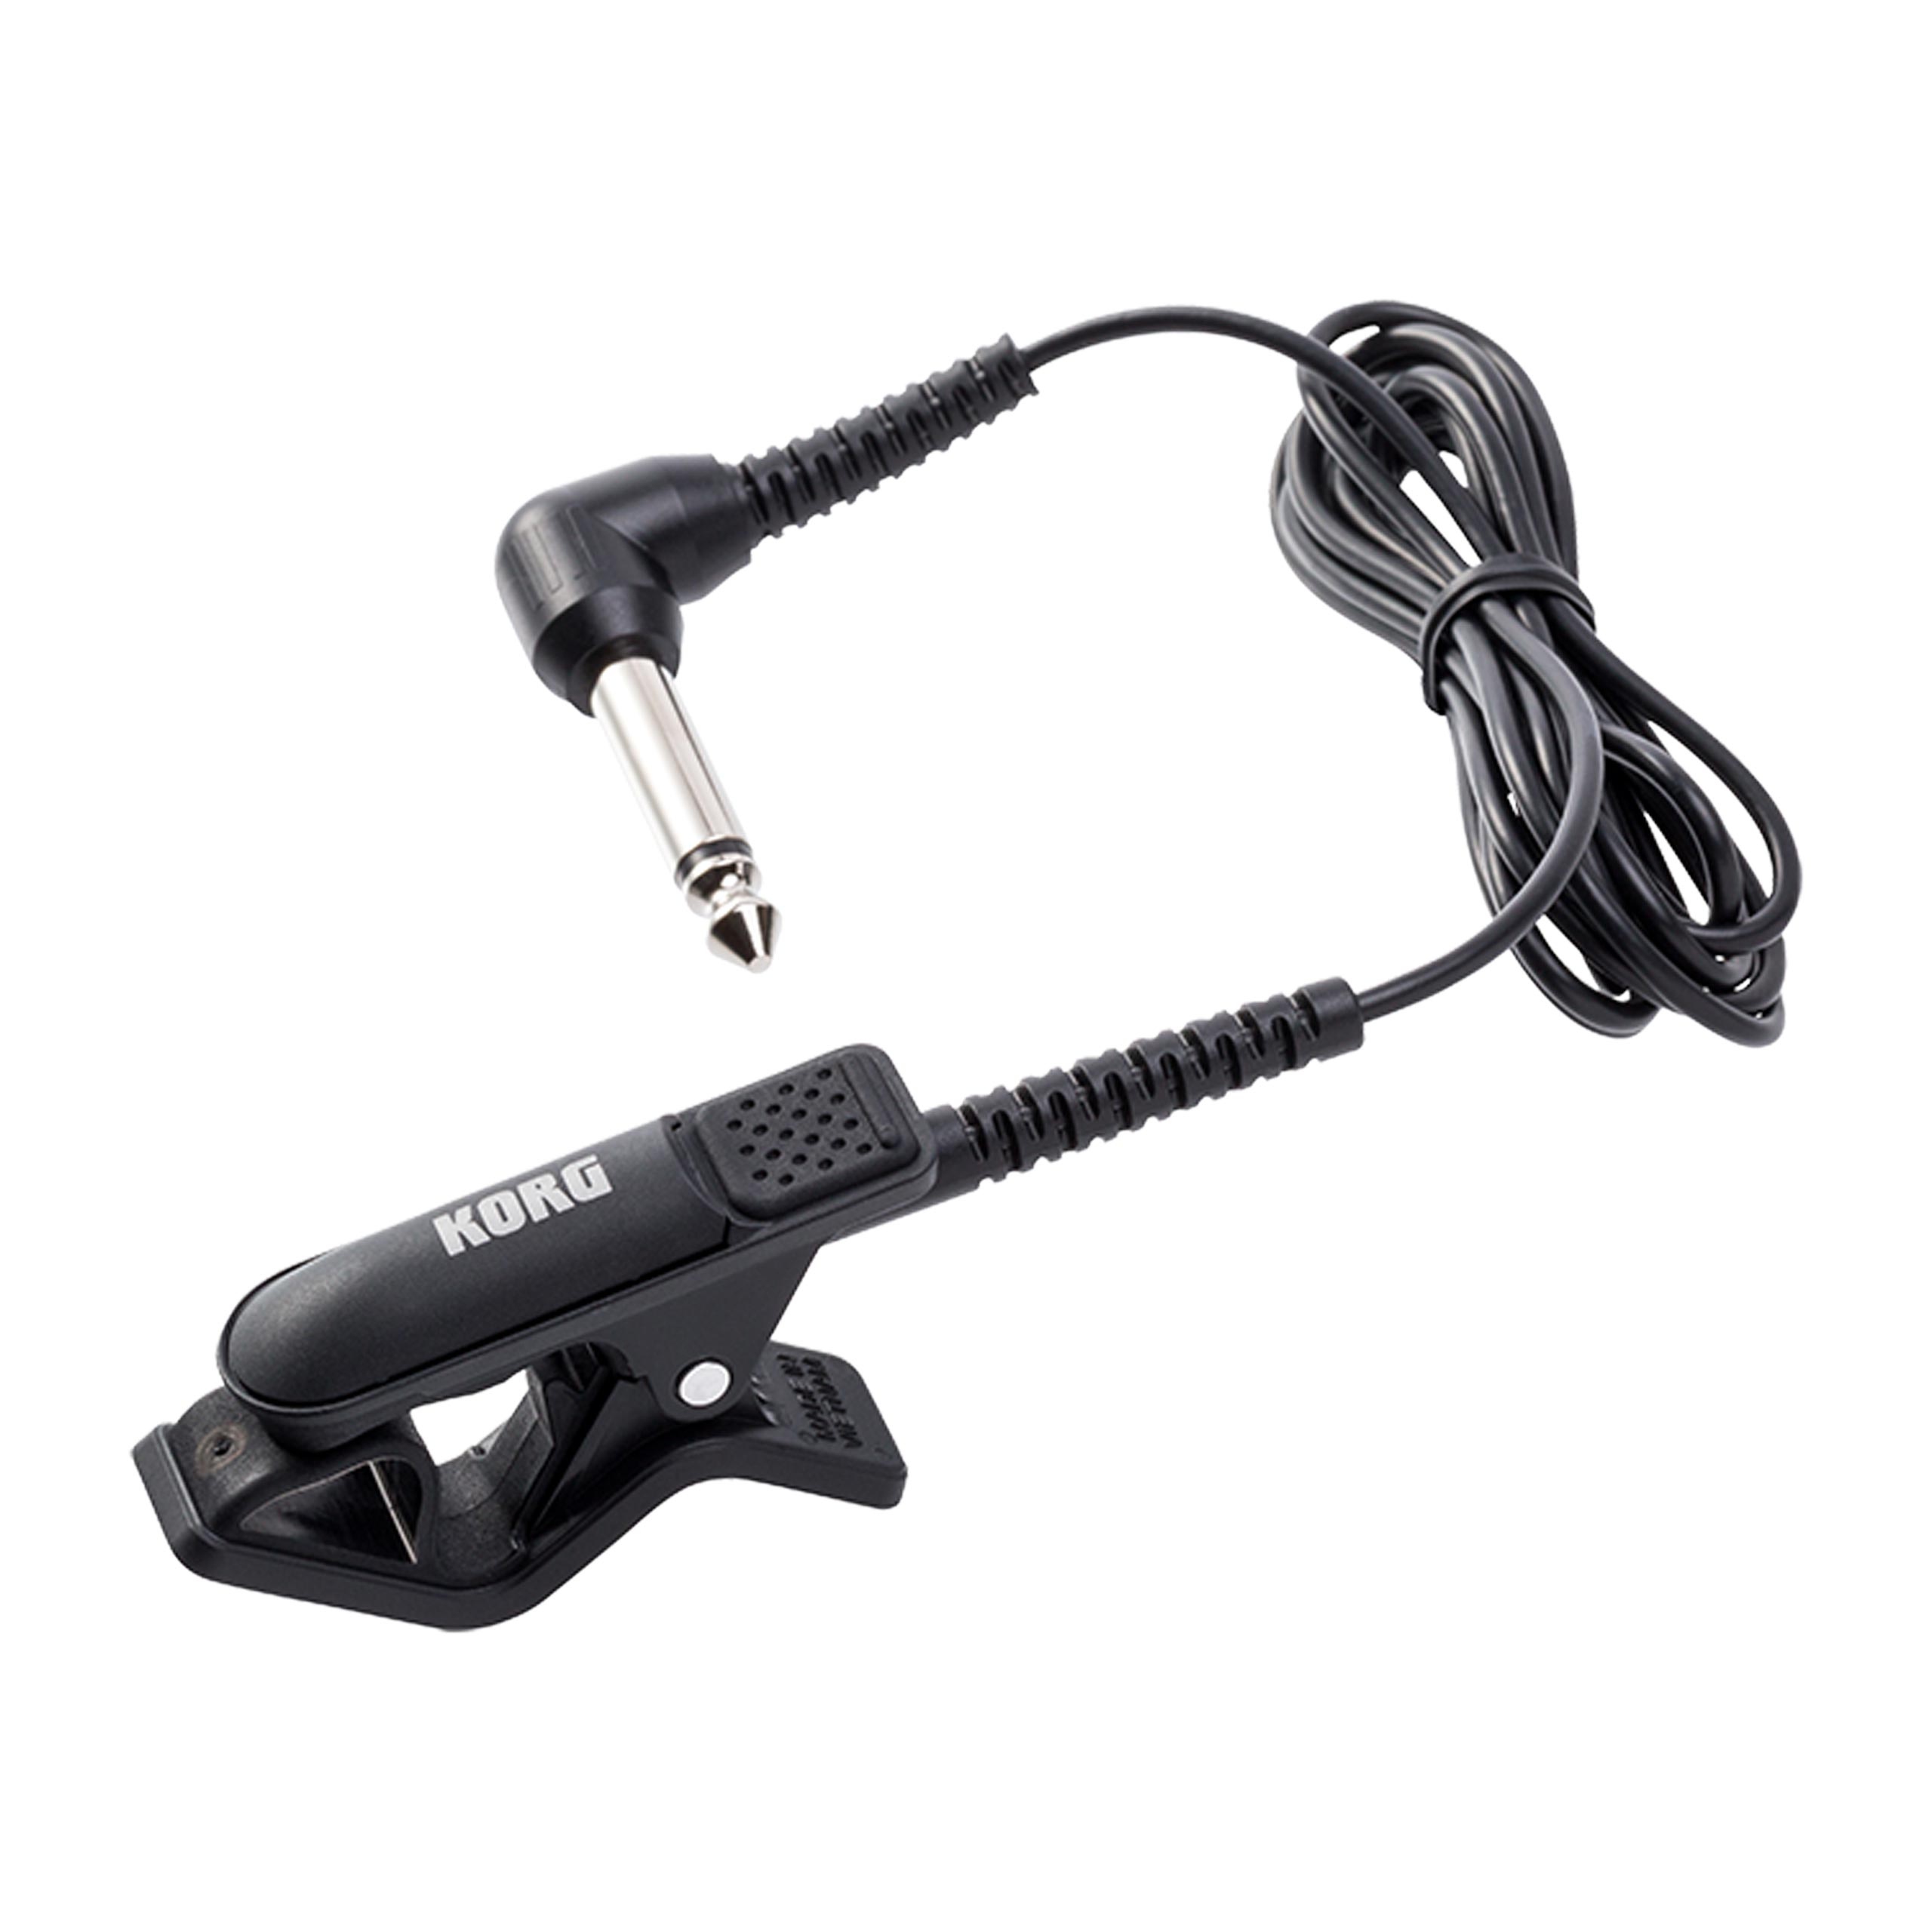 Korg CM-300 Contact Microphone in Black